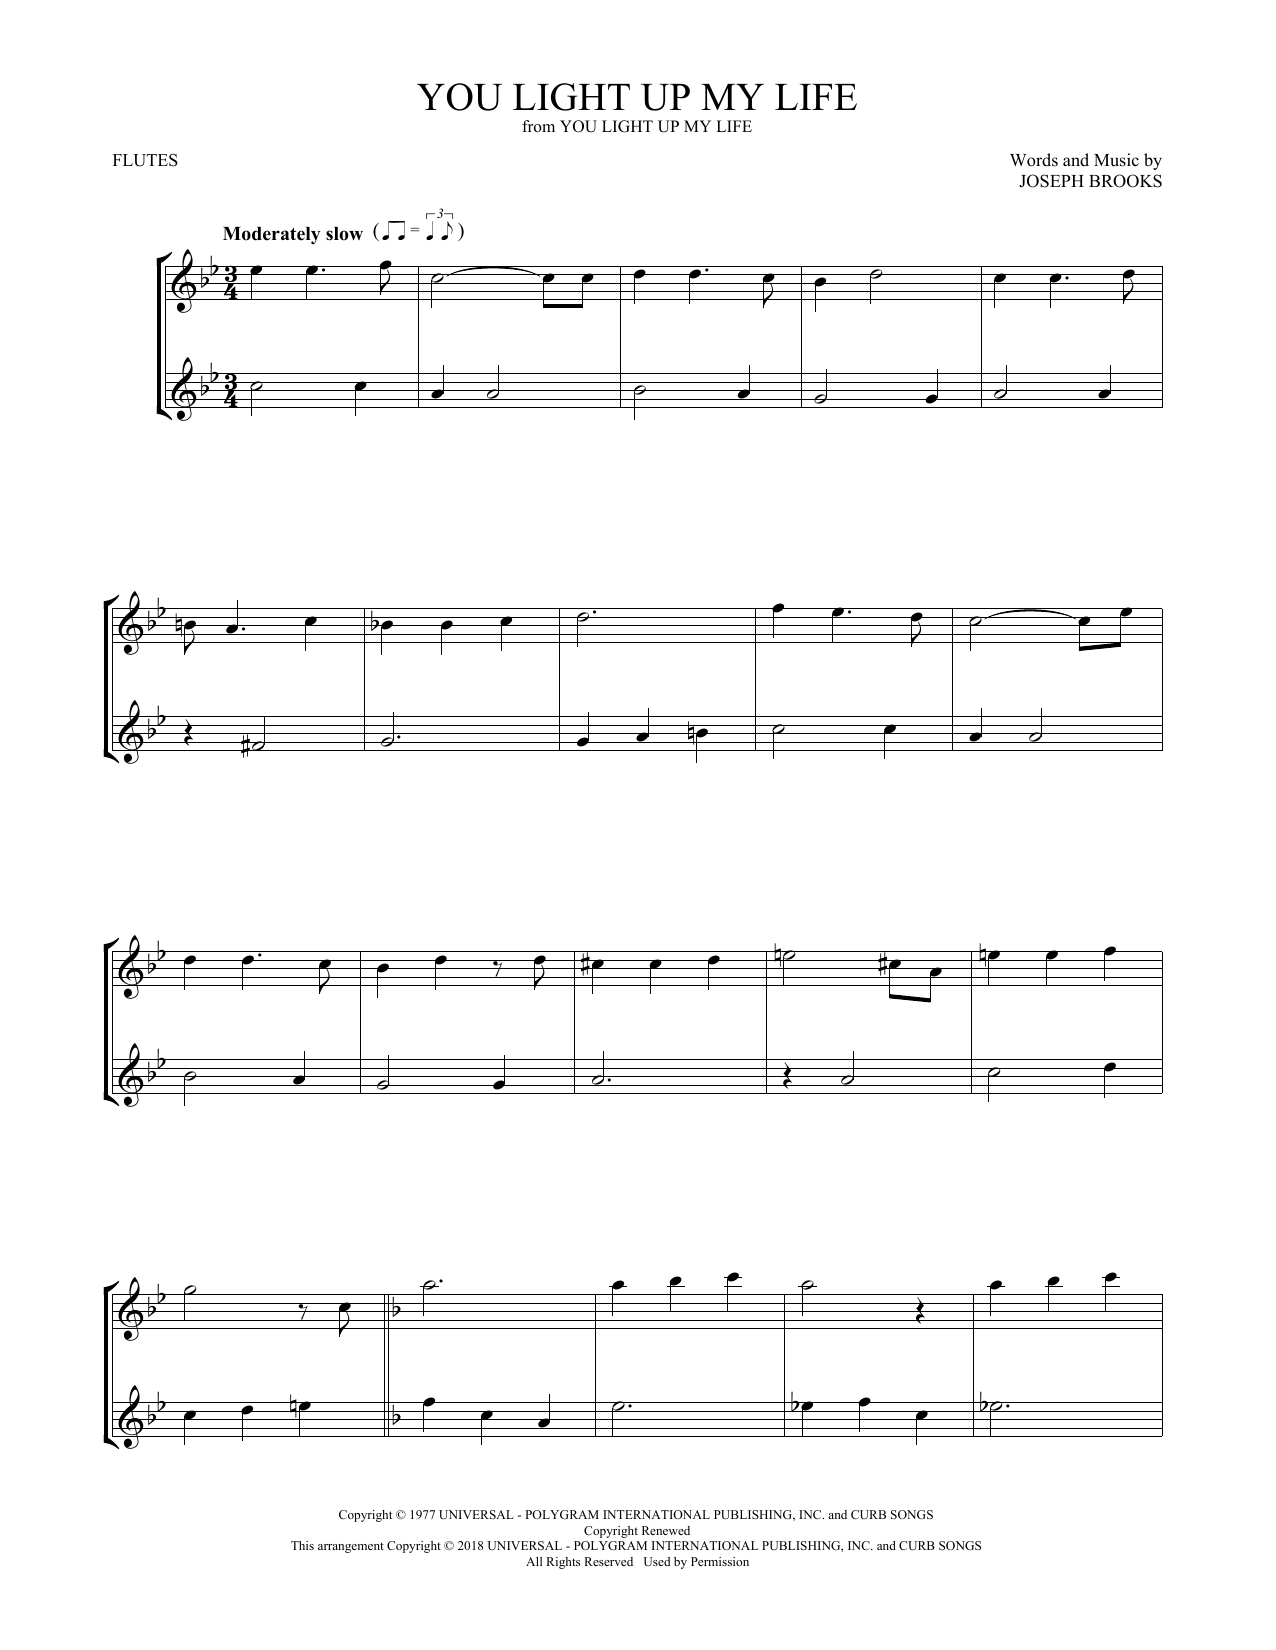 Download Debby Boone You Light Up My Life Sheet Music